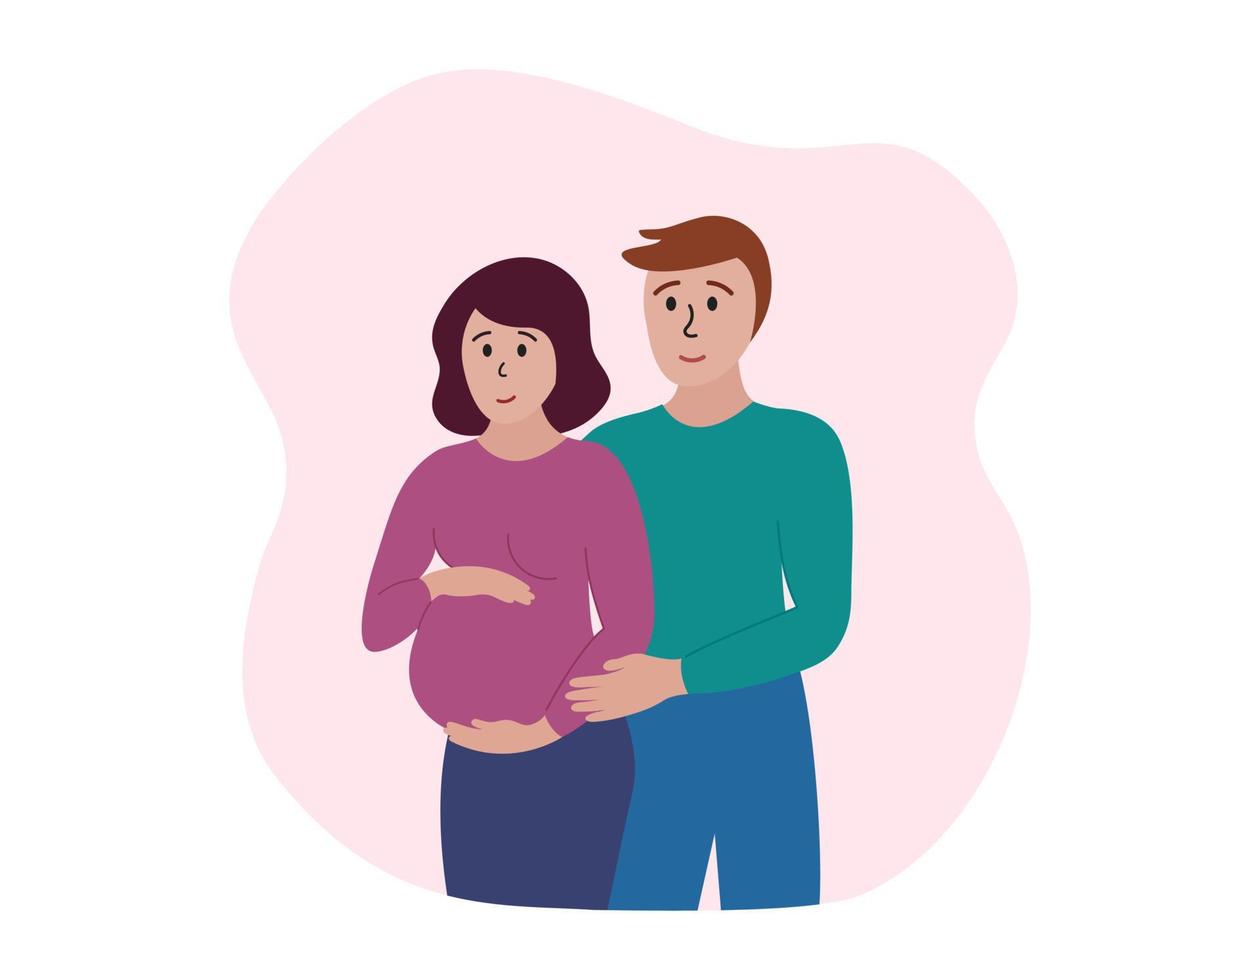 Pregnancy concept. Happy married couple. Pregnant woman and hugging her man. Expectant mom and dad couple. Vector flat illustration